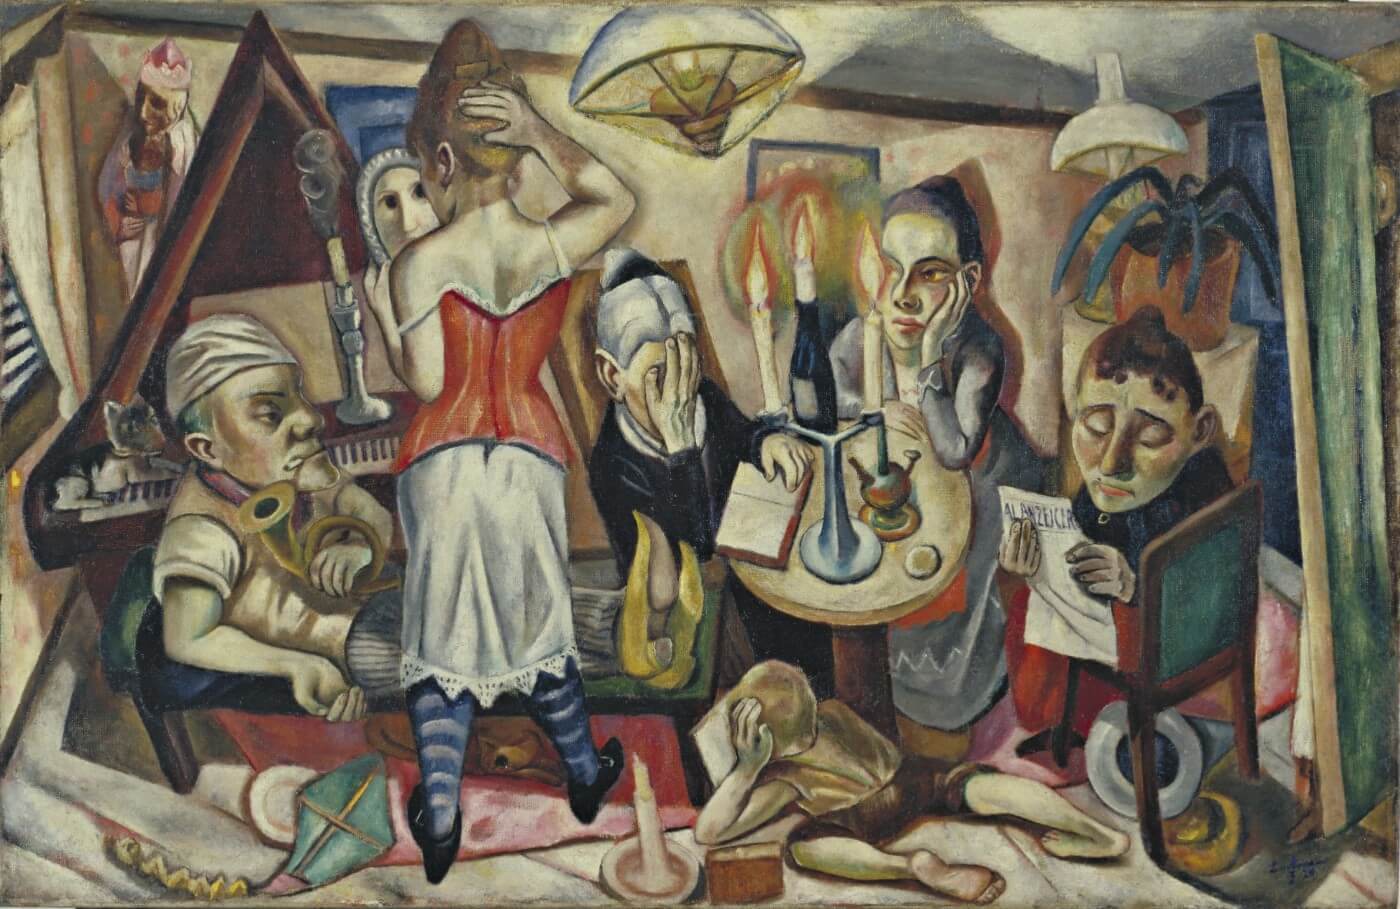 Family - Max Beckmann - Art Prints by Max | Buy Posters, Frames, Canvas & Digital Prints | Small, Compact, Medium and Variants